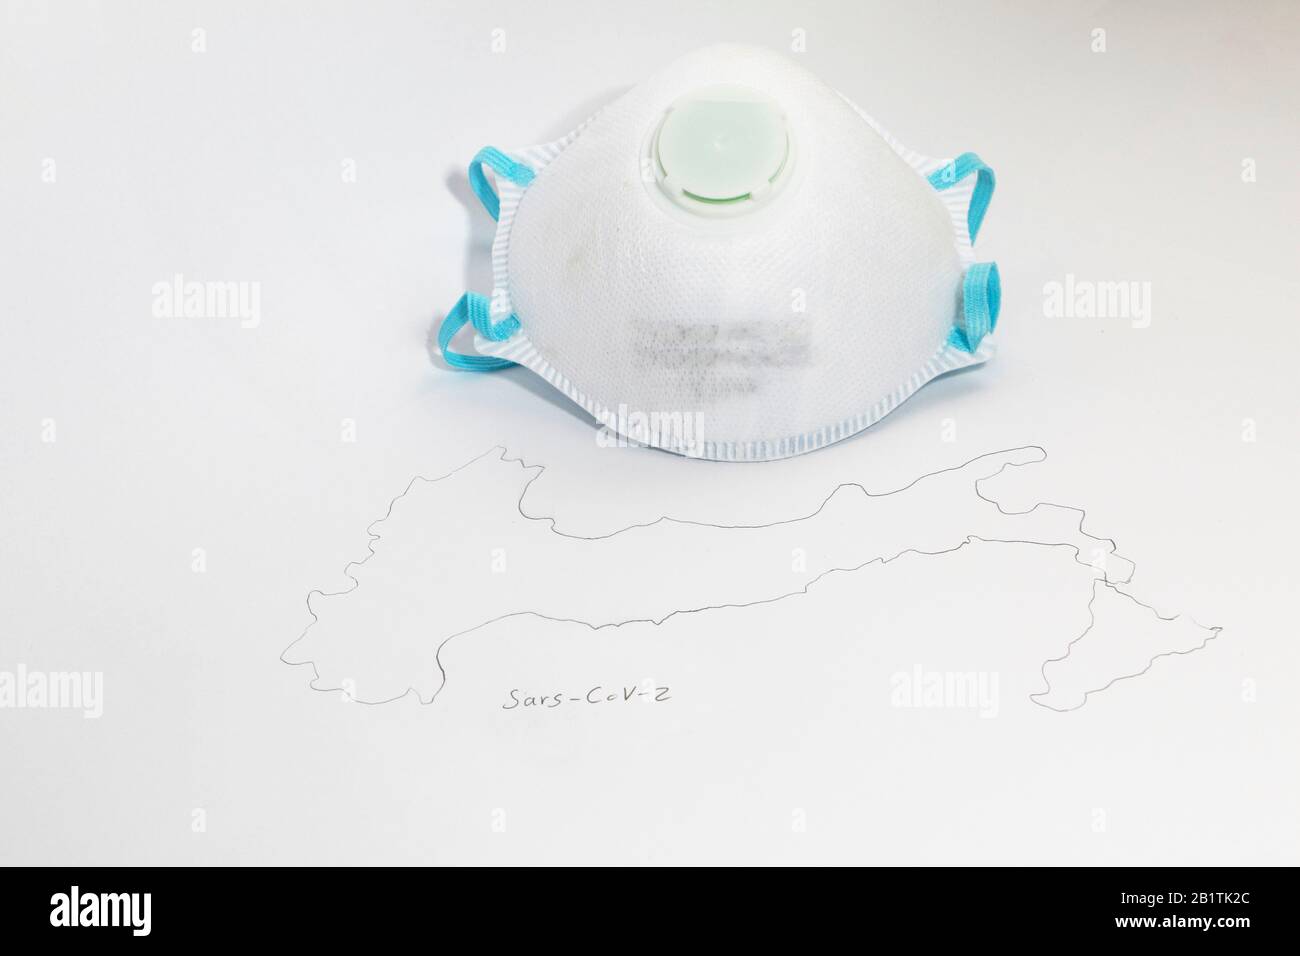 FREIBURG, GERMANY - FEB 24, 2020: A medical mask type FFP2 next to a symbolic map of italy representing the outbreak of the new corona virus / SARS Stock Photo